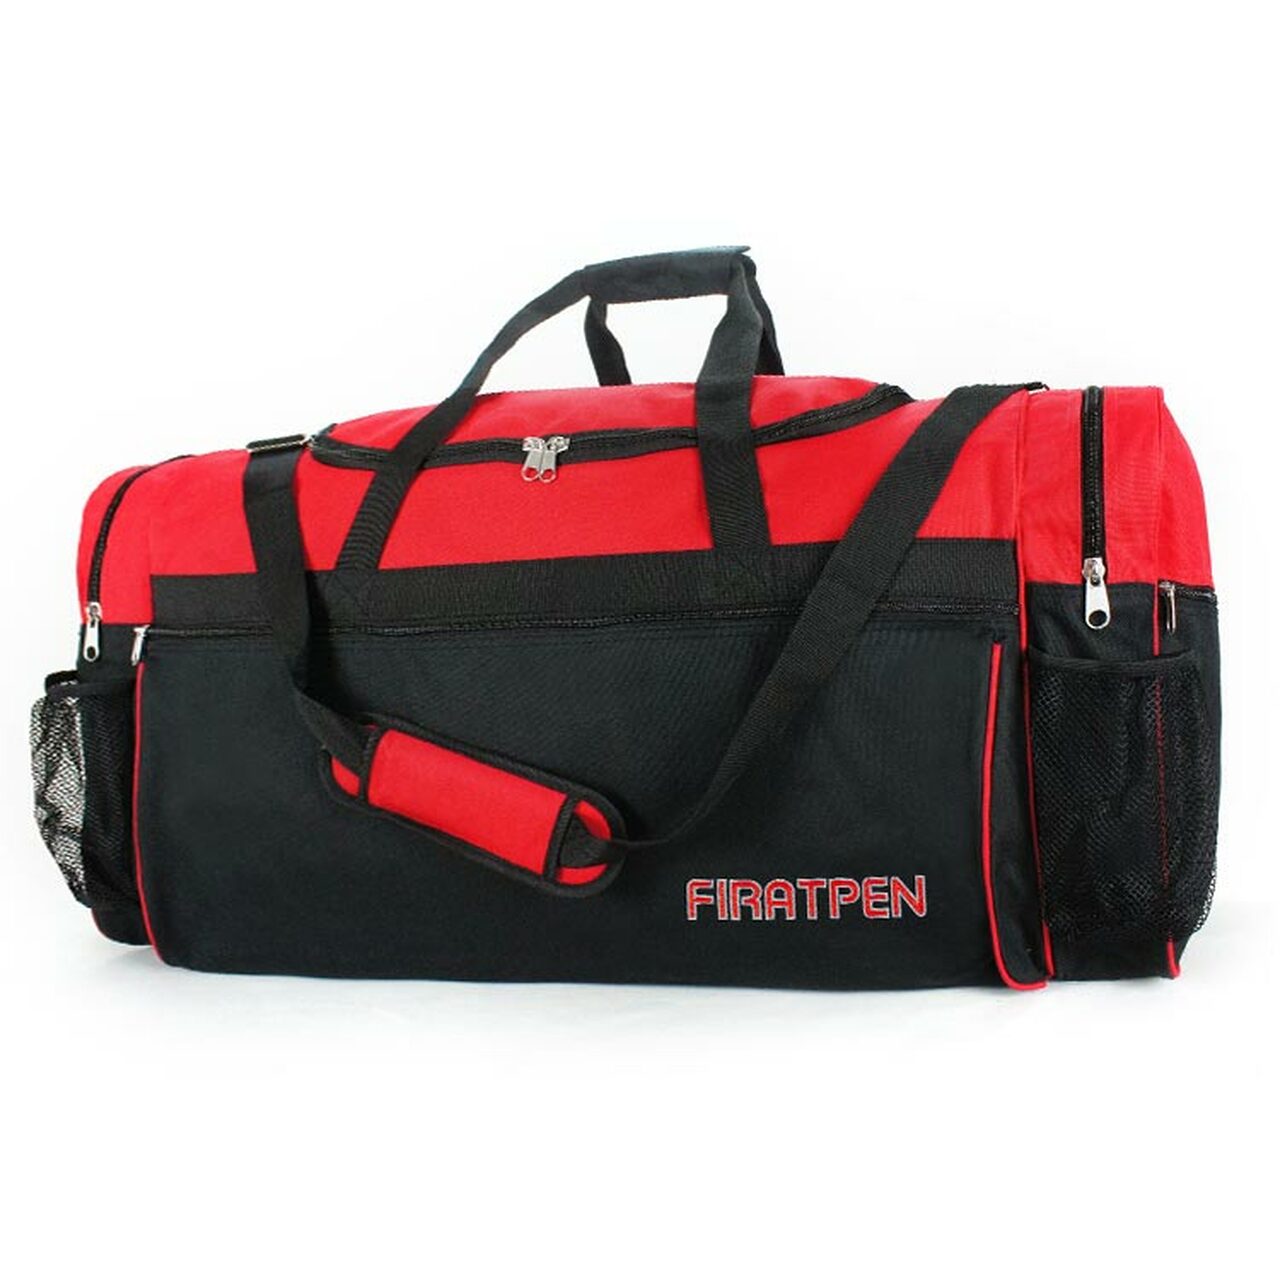 GYM Sports Bags In Pakistan